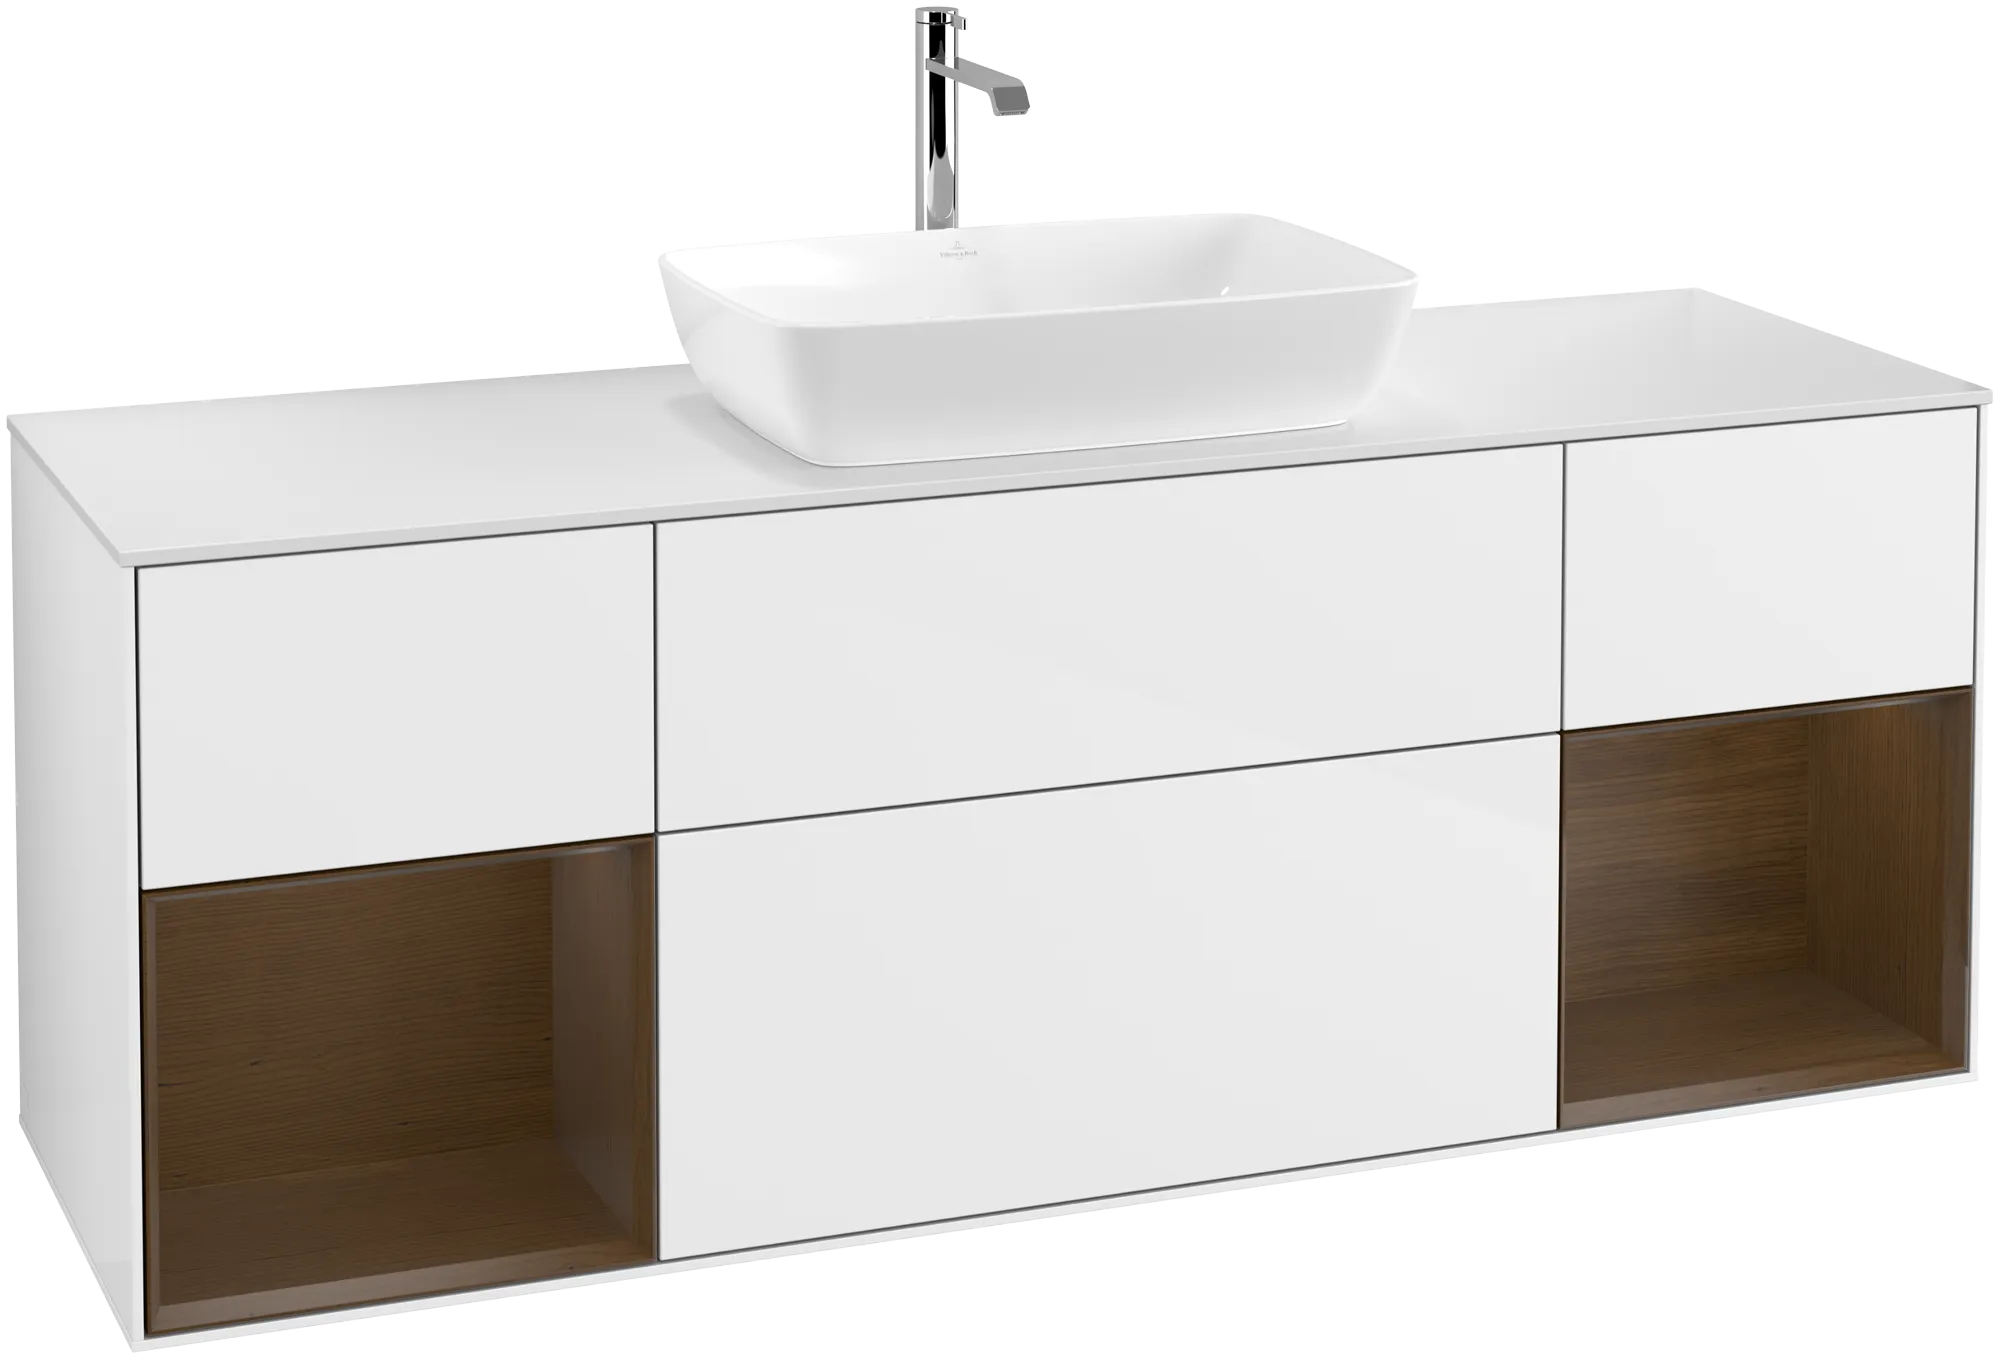 VILLEROY BOCH Finion Vanity unit, with lighting, 4 pull-out compartments, 1600 x 603 x 501 mm, Glossy White Lacquer / Walnut Veneer / Glass White Matt #G861GNGF resmi